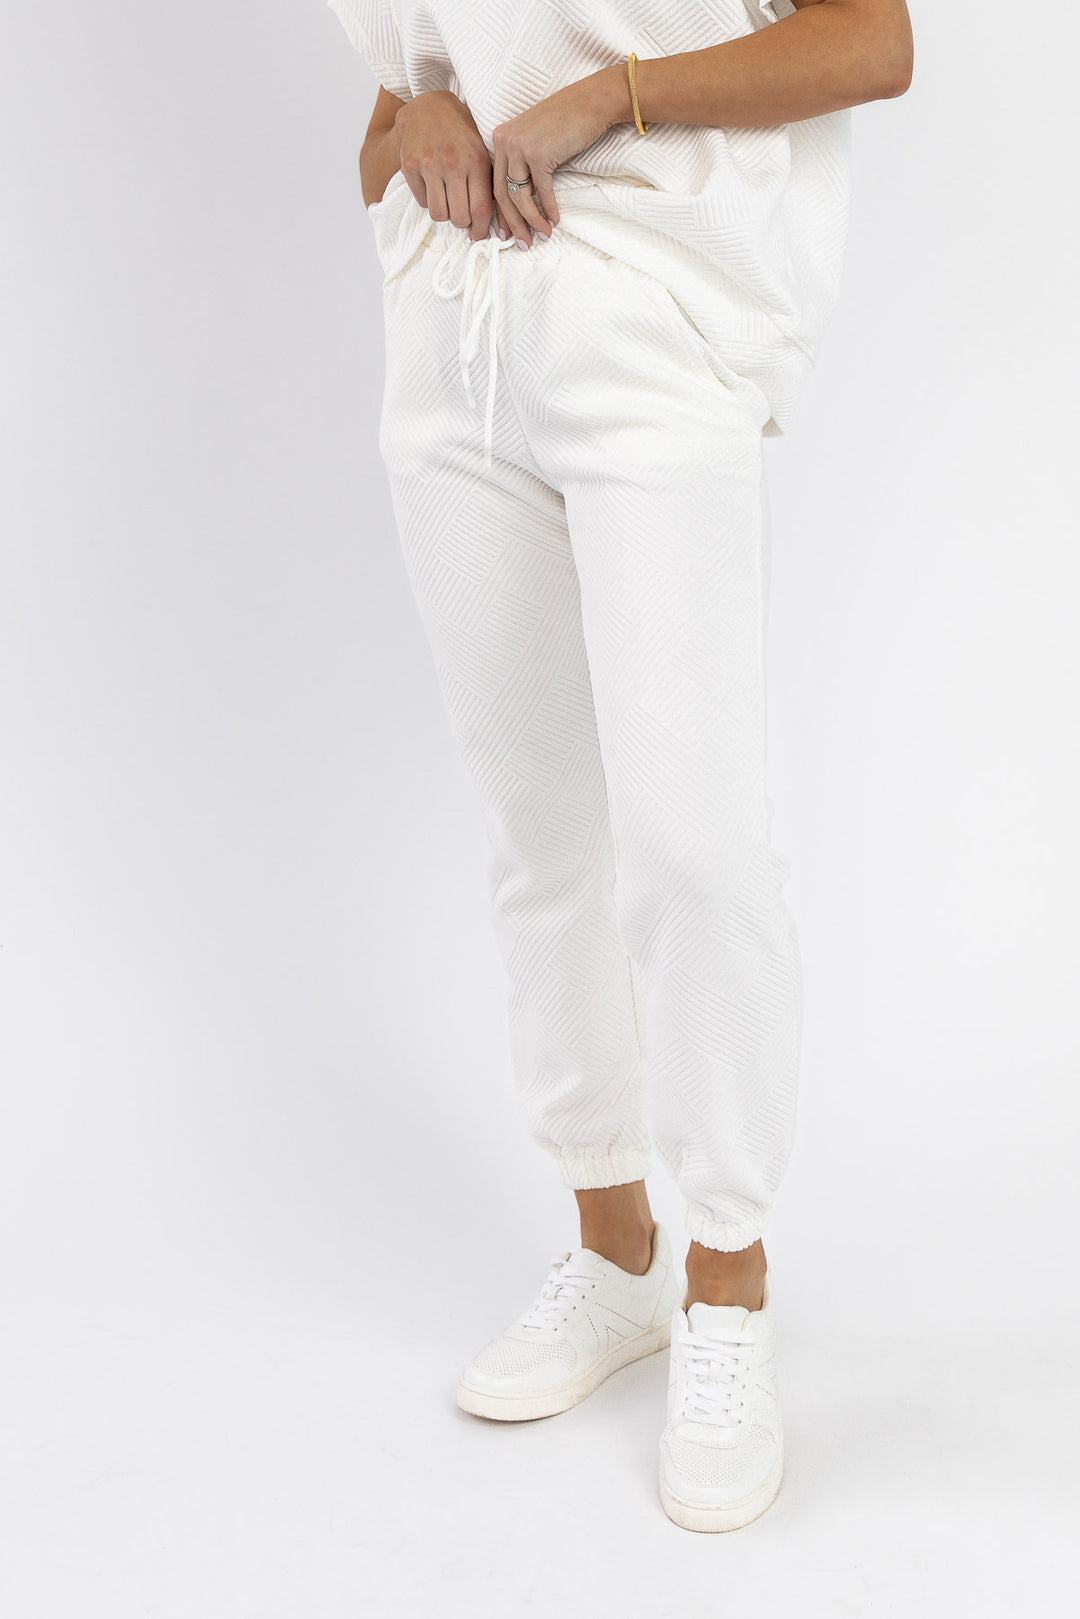 Weekend Vibe White Jogger